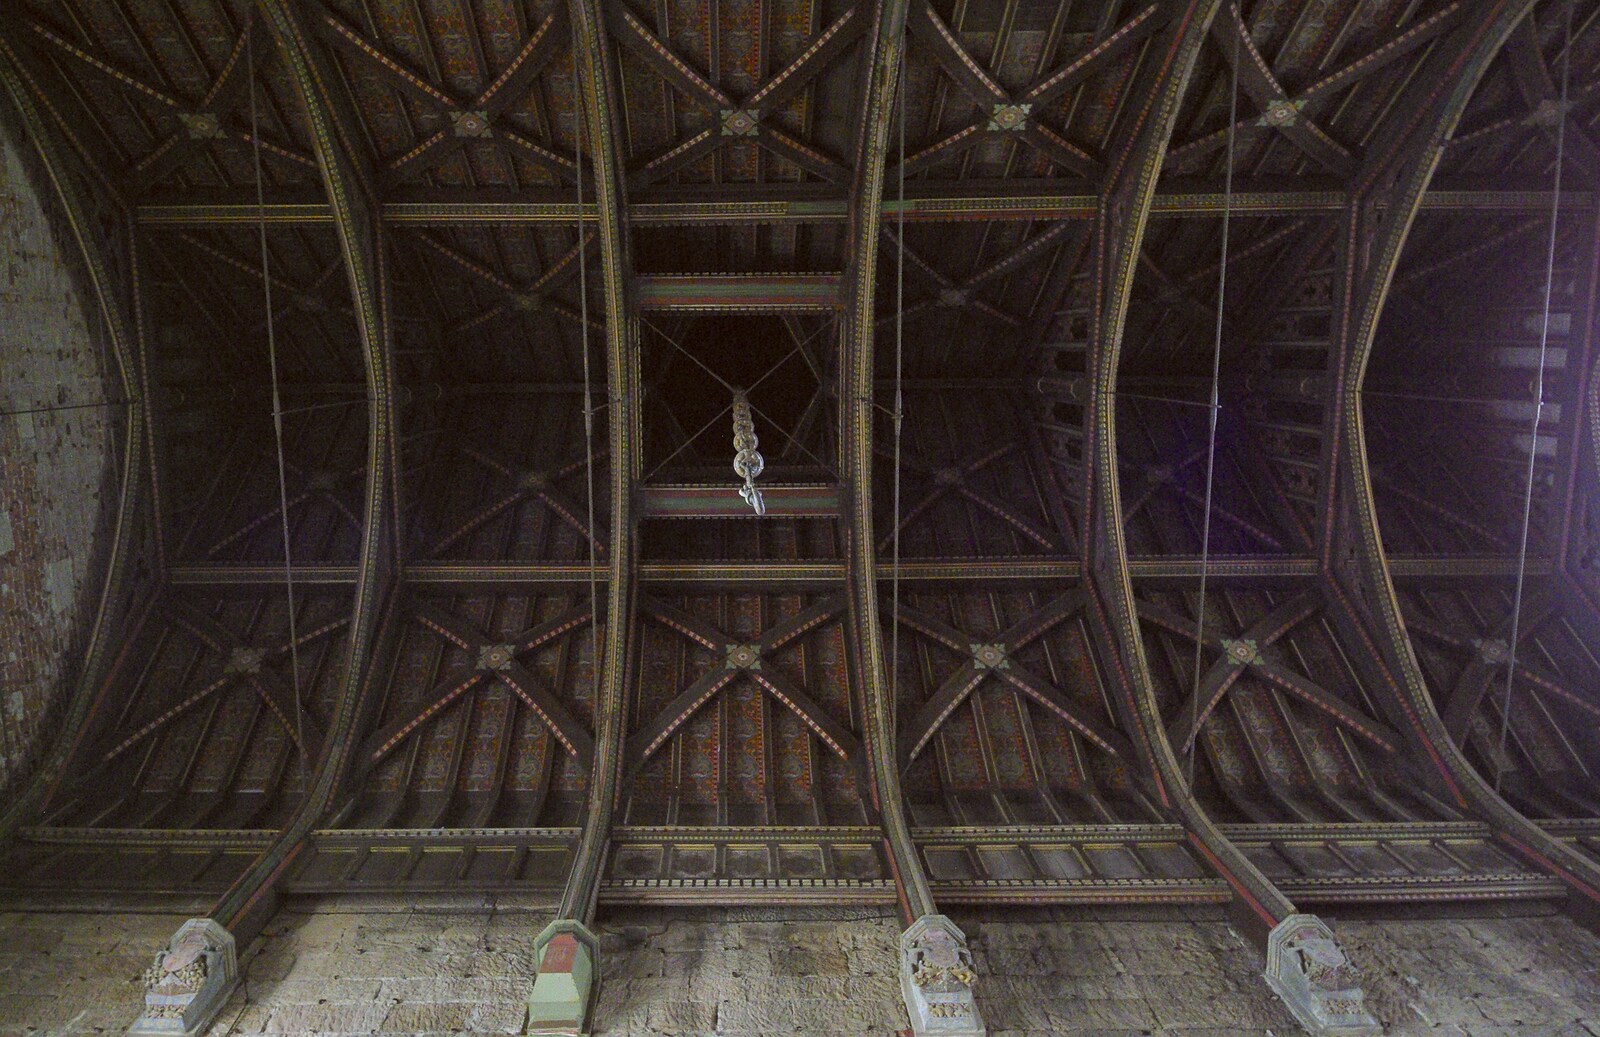 Qualcomm at Alton Towers, Staffordshire - 29th June 2008: An impressive ceiling